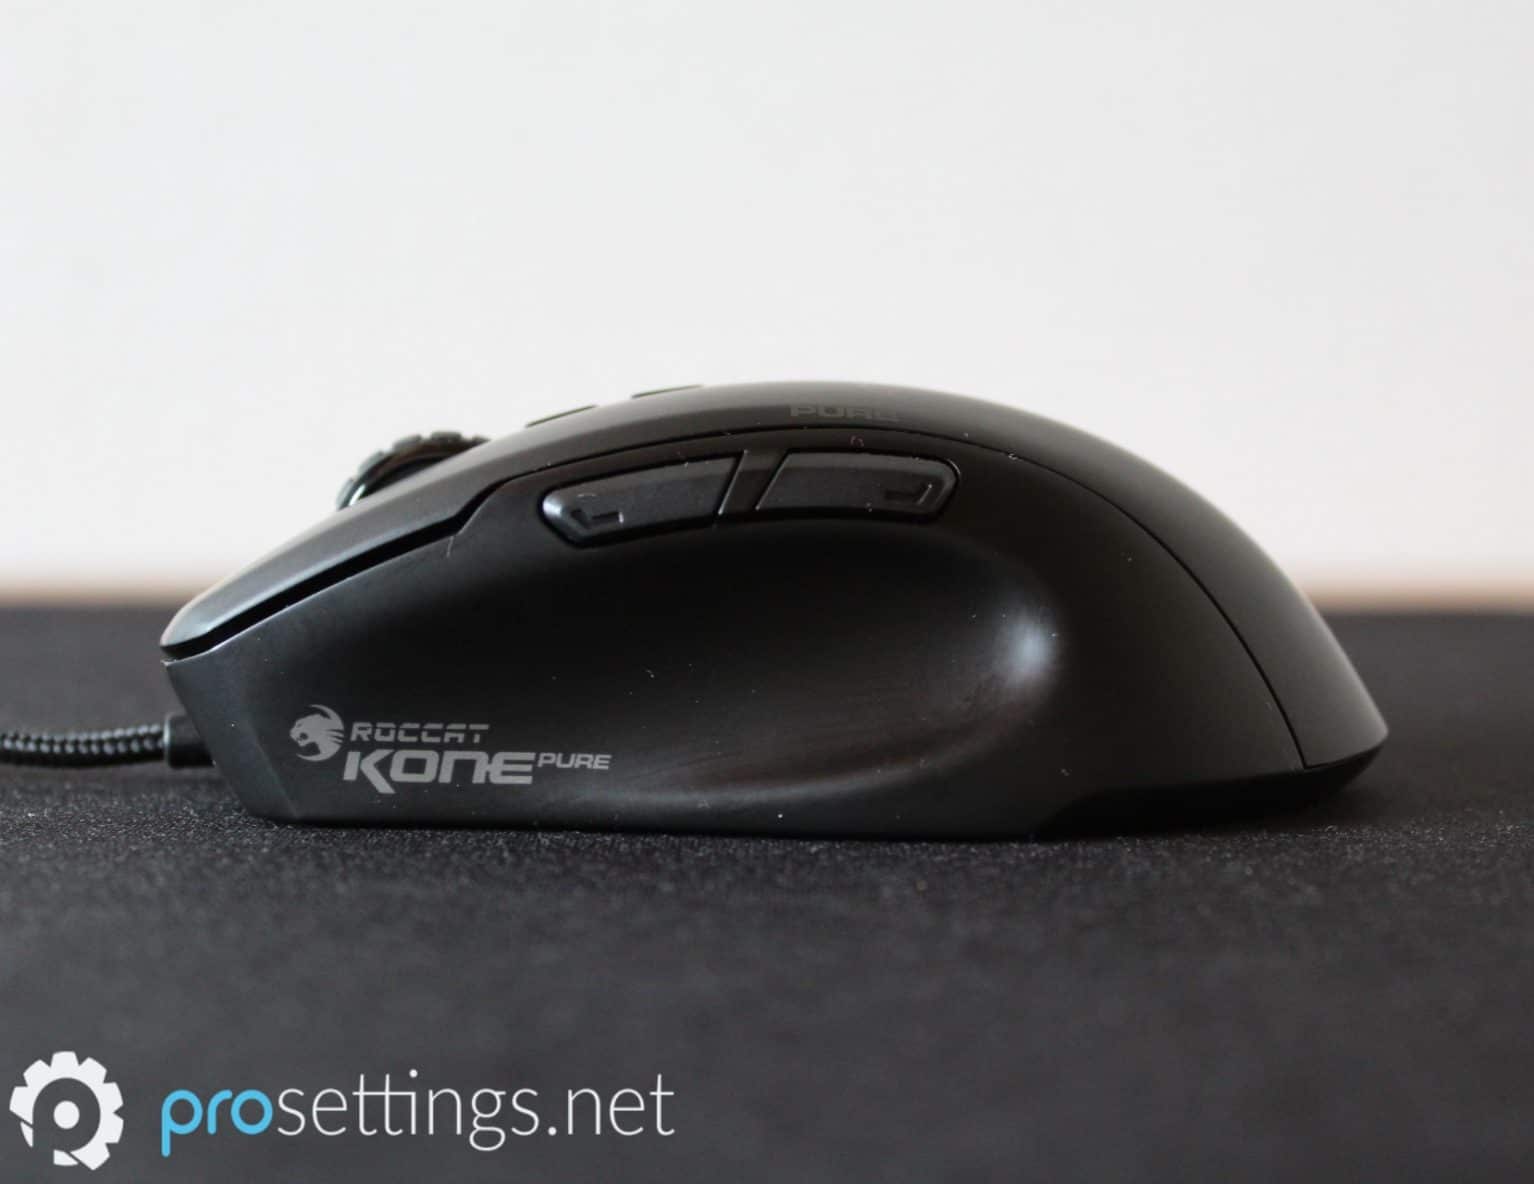 Roccat Kone Pure Owl-Eye Side Review Mouse